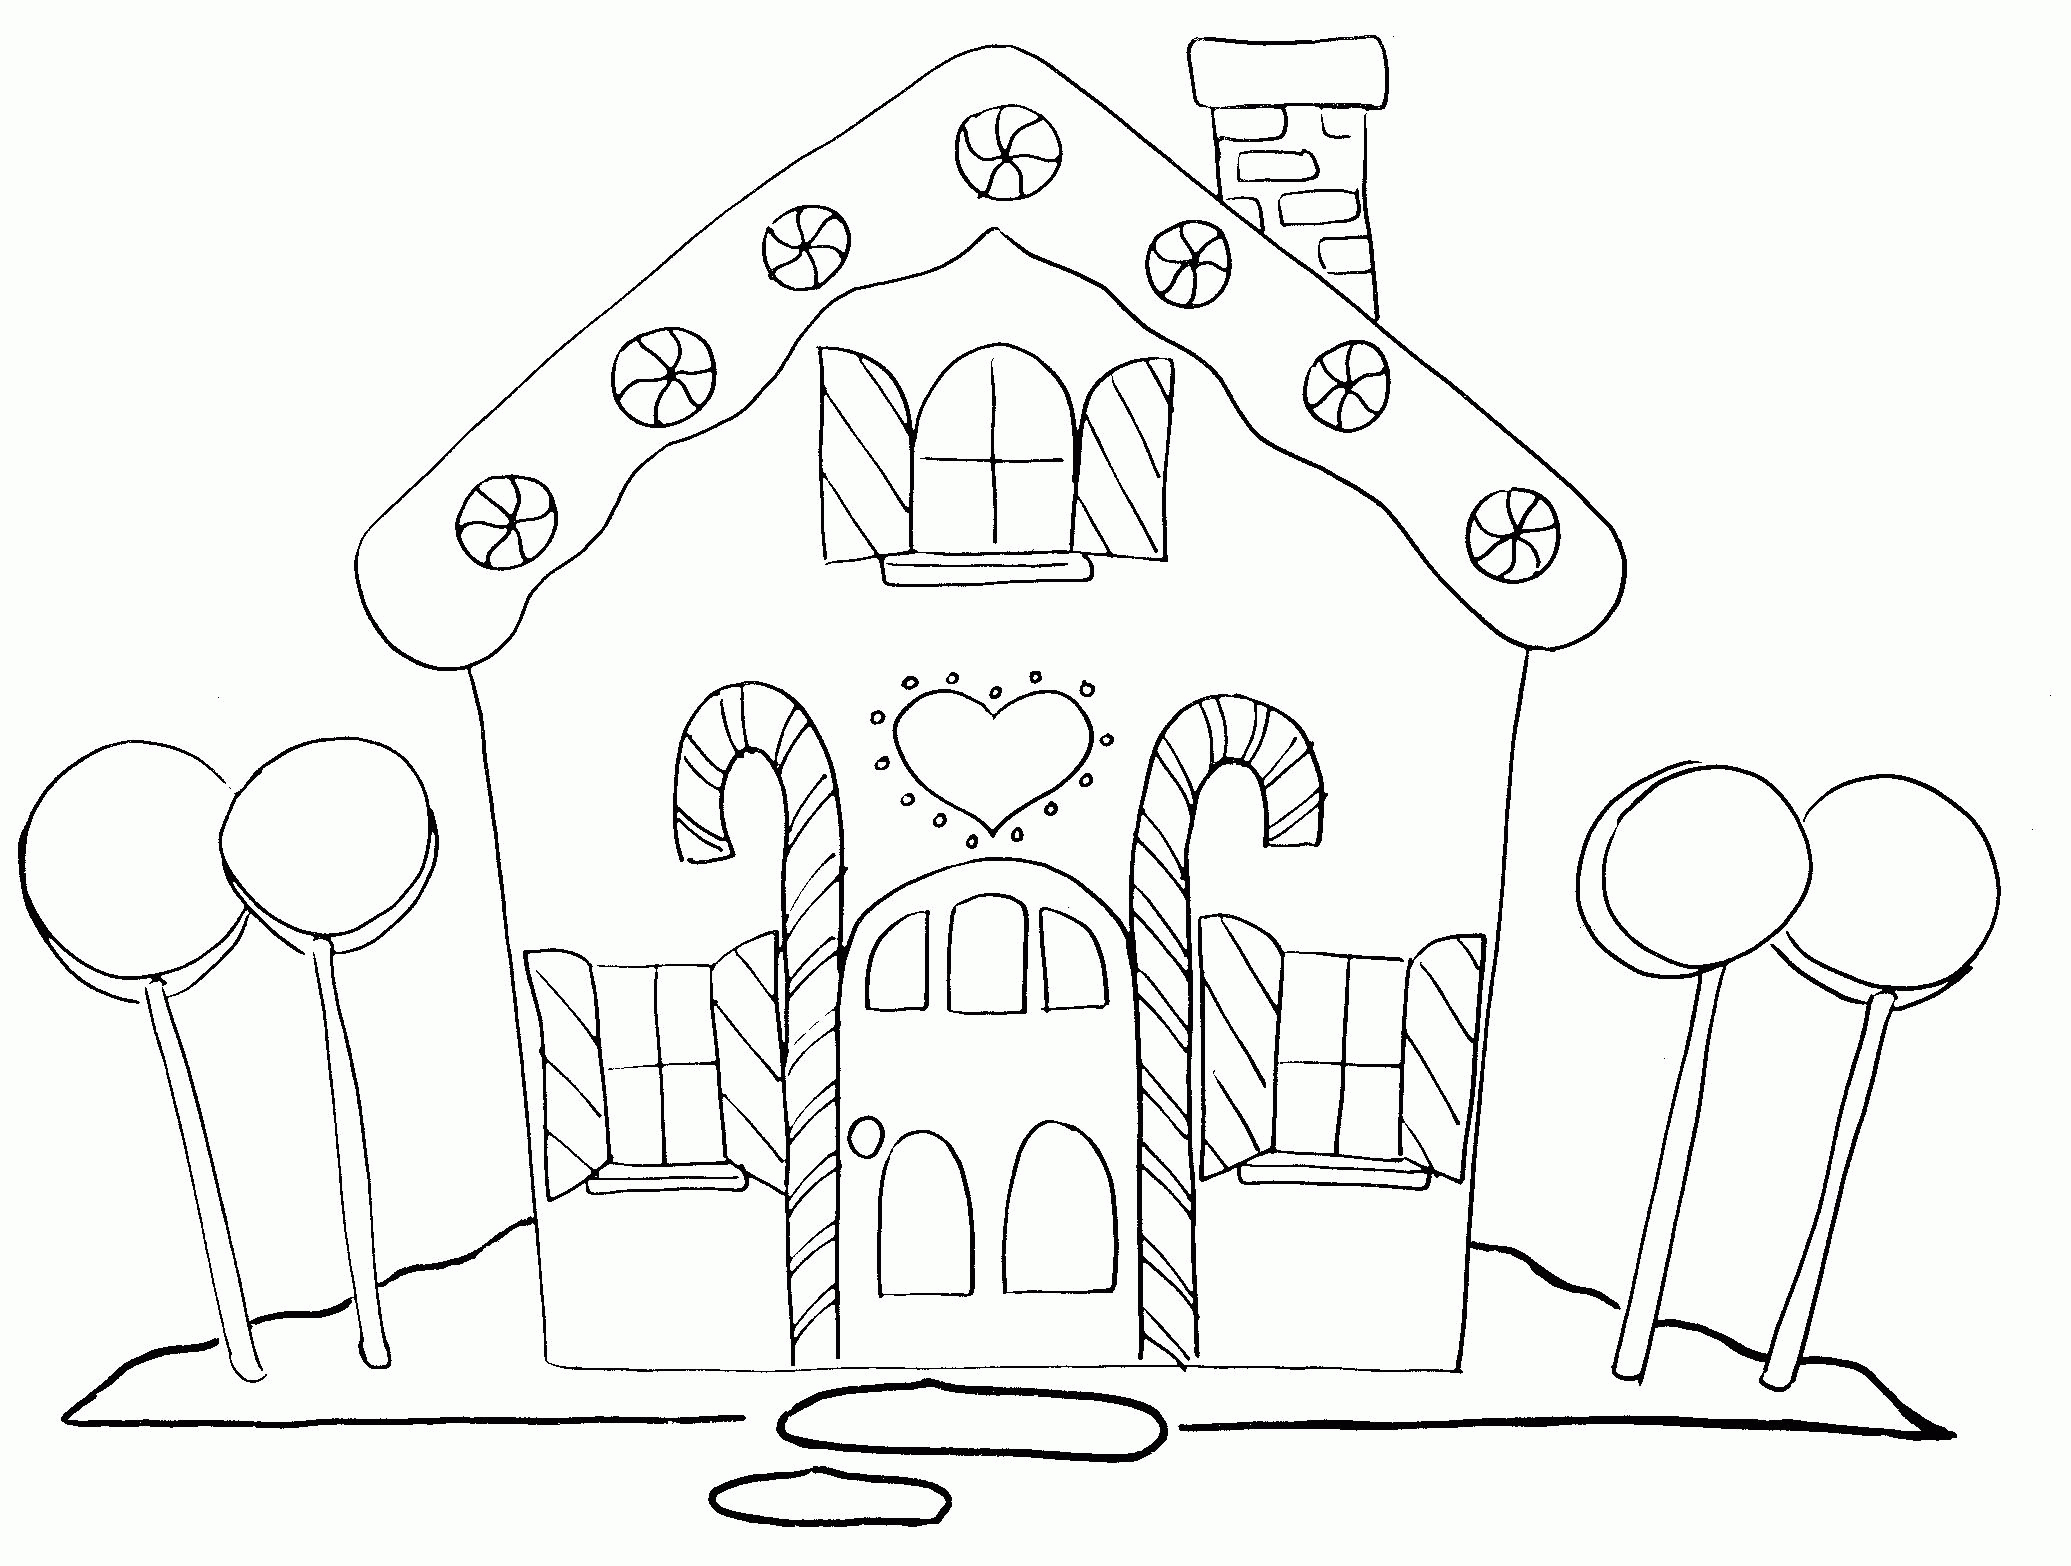 Printable Gingerbread House Coloring Pages - Coloring Home - Free Gingerbread House Printables